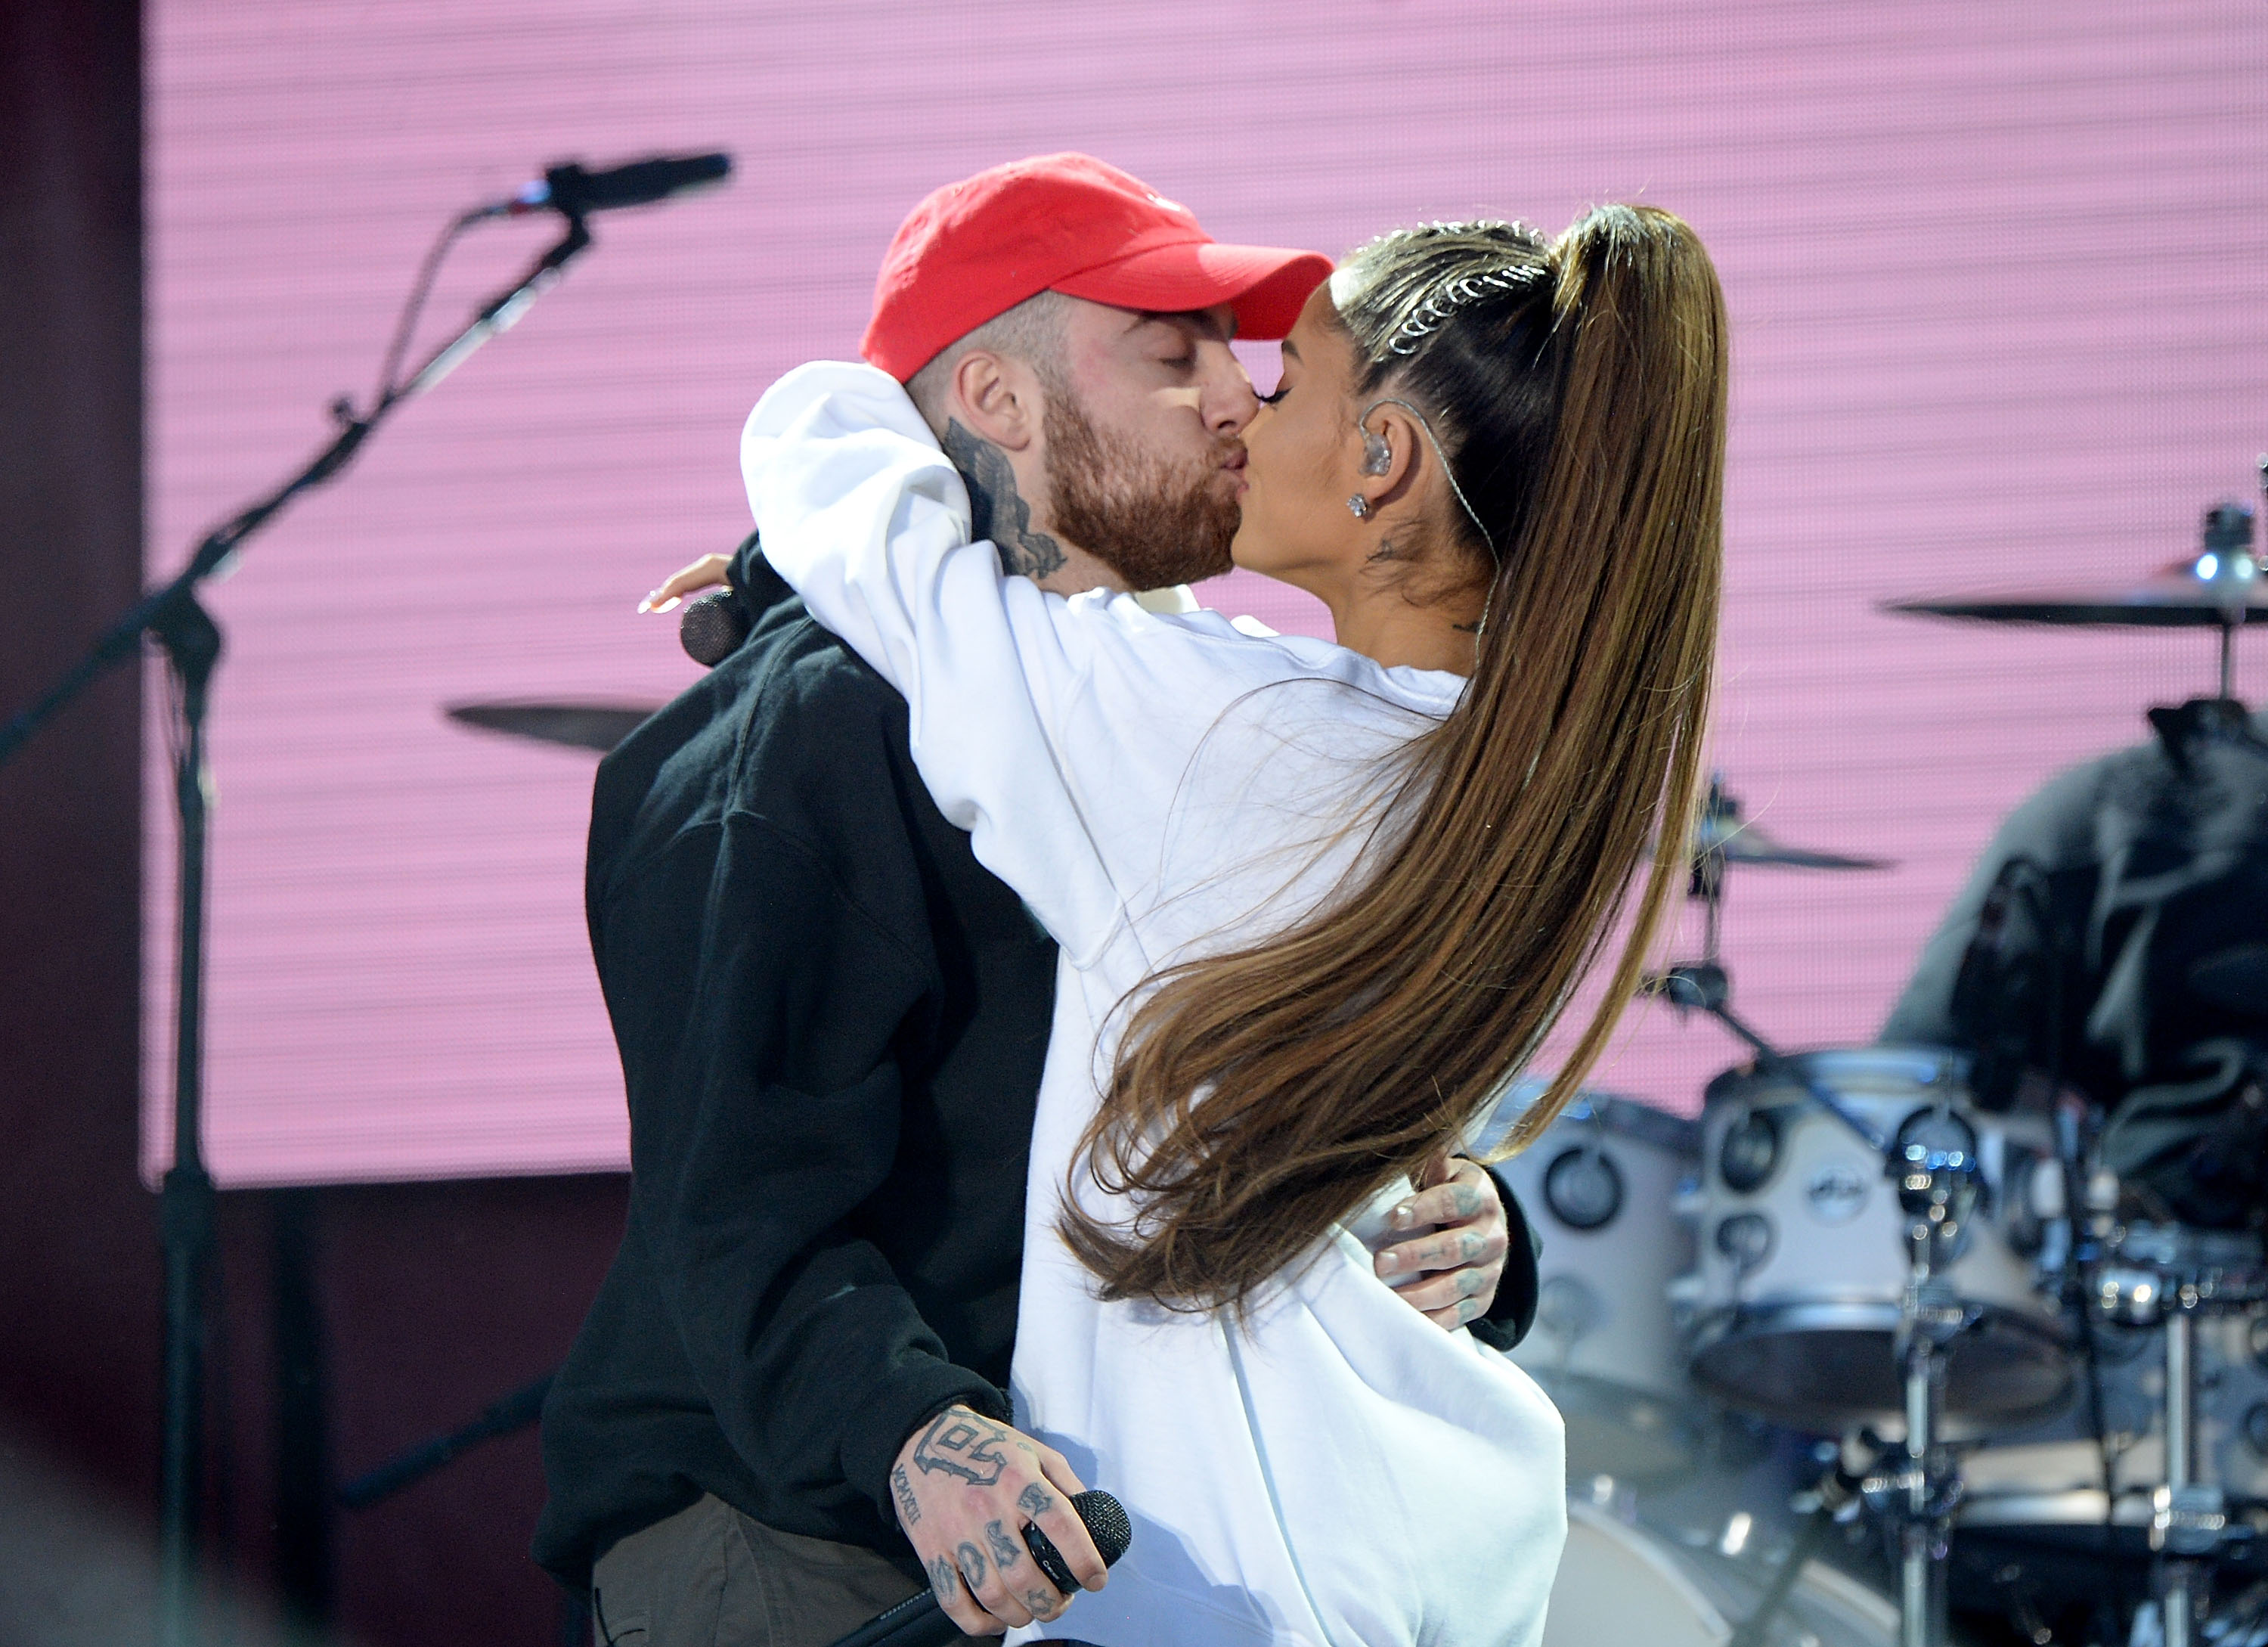 Mac Miller and Ariana Grande kiss on stage during the One Love Manchester Benefit Concert at Old Trafford Cricket Ground on June 4, 2017 in Manchester, England | Source: Getty Images